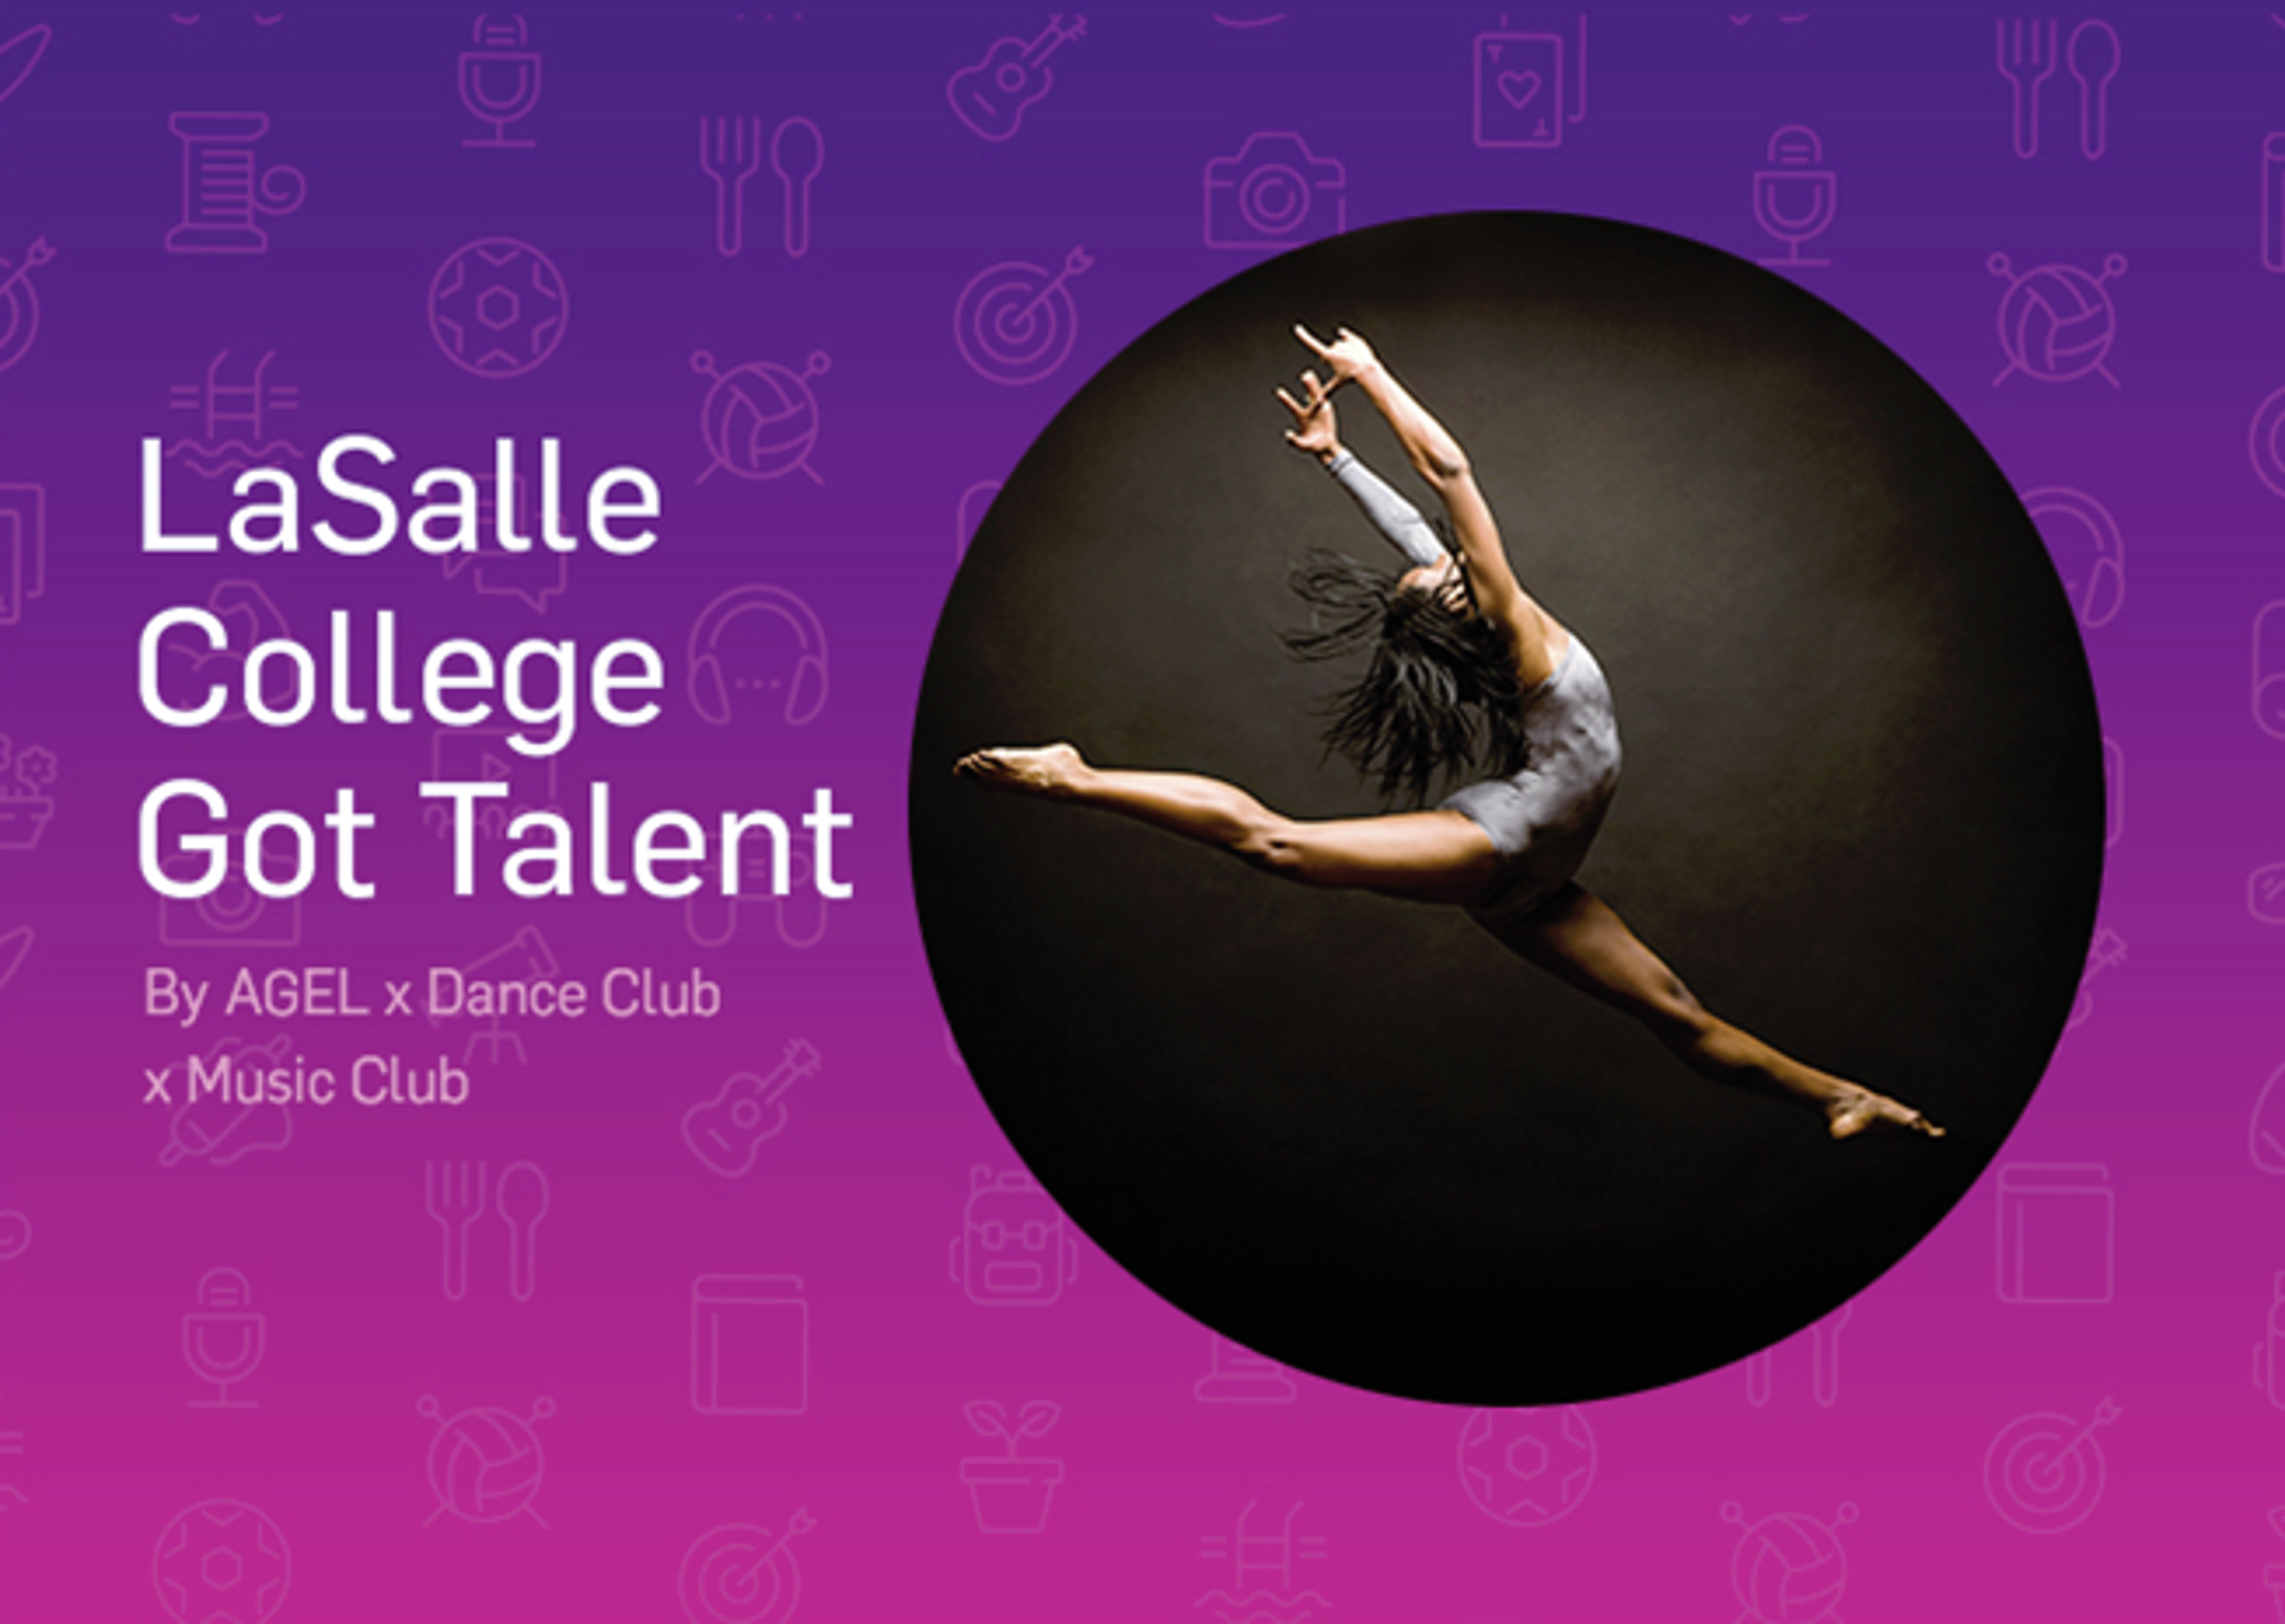 Energetic dancer mid-leap against a dark backdrop, promoting LaSalle College's talent event with a vibrant purple theme.